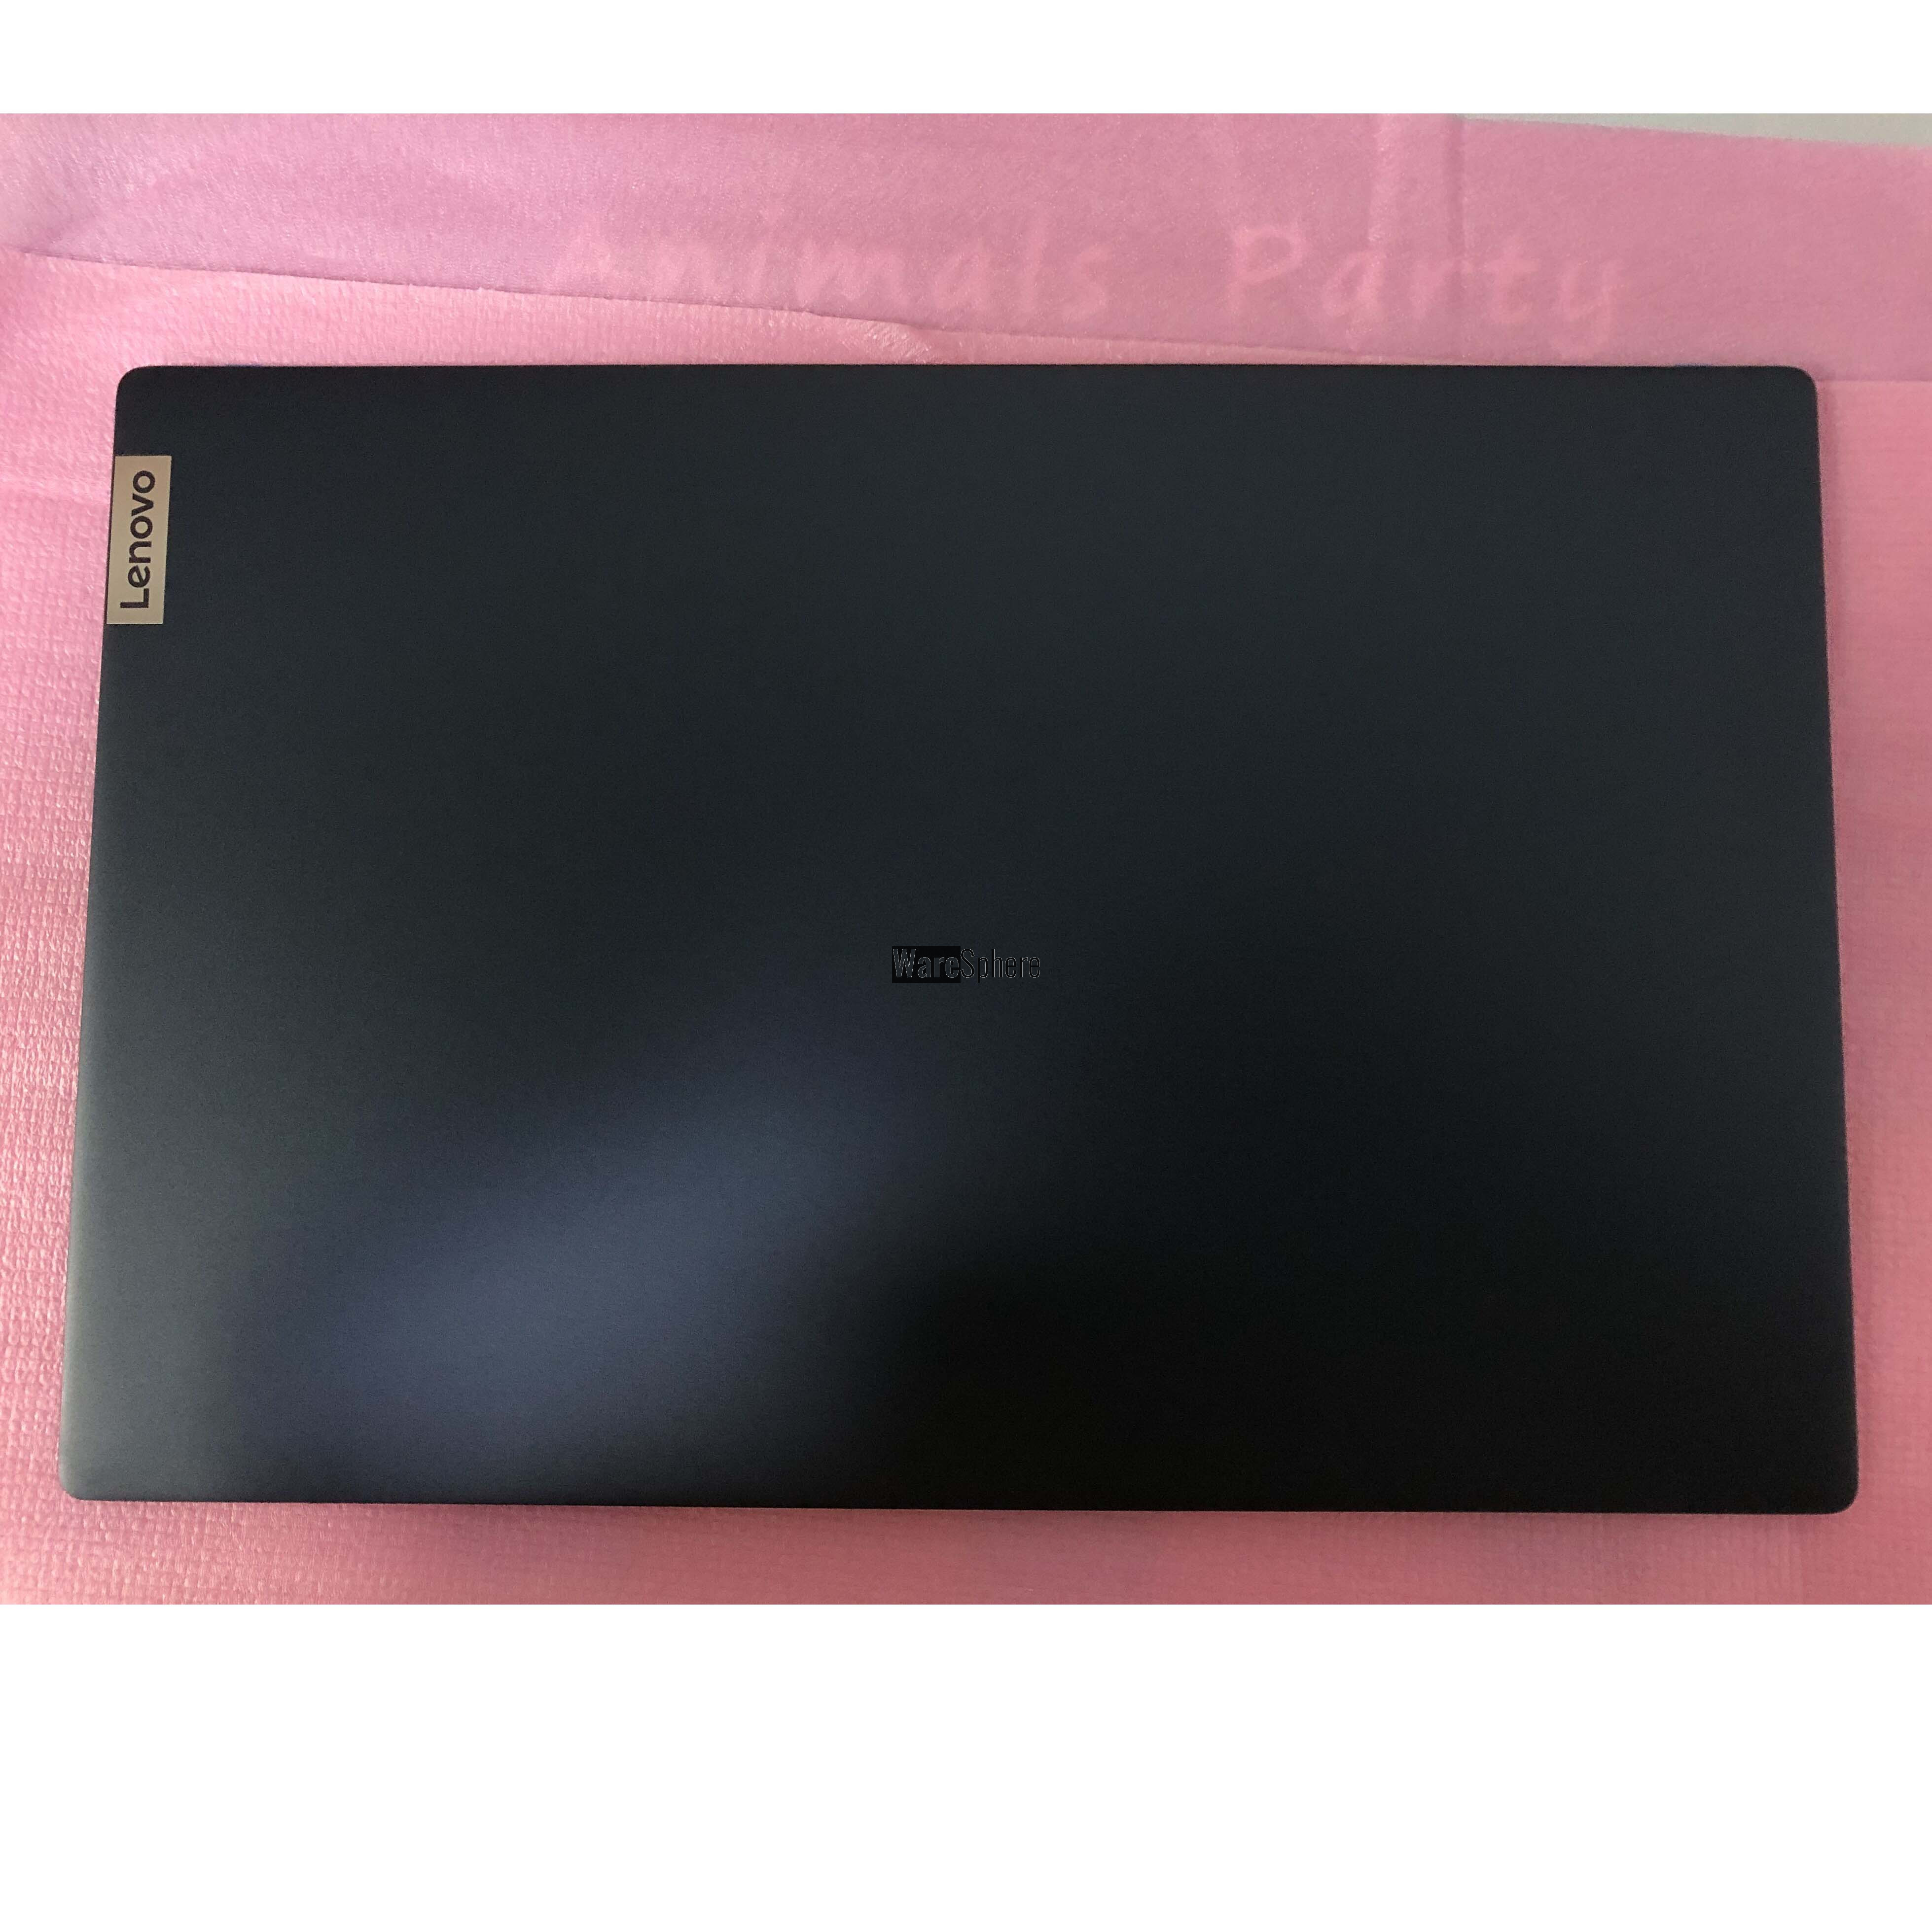 LCD Back Cover for Lenovo ideapad 5 15IIL05 15ARE05 15ITL05 5CB0X56075 AM1XX000A30 BLUE